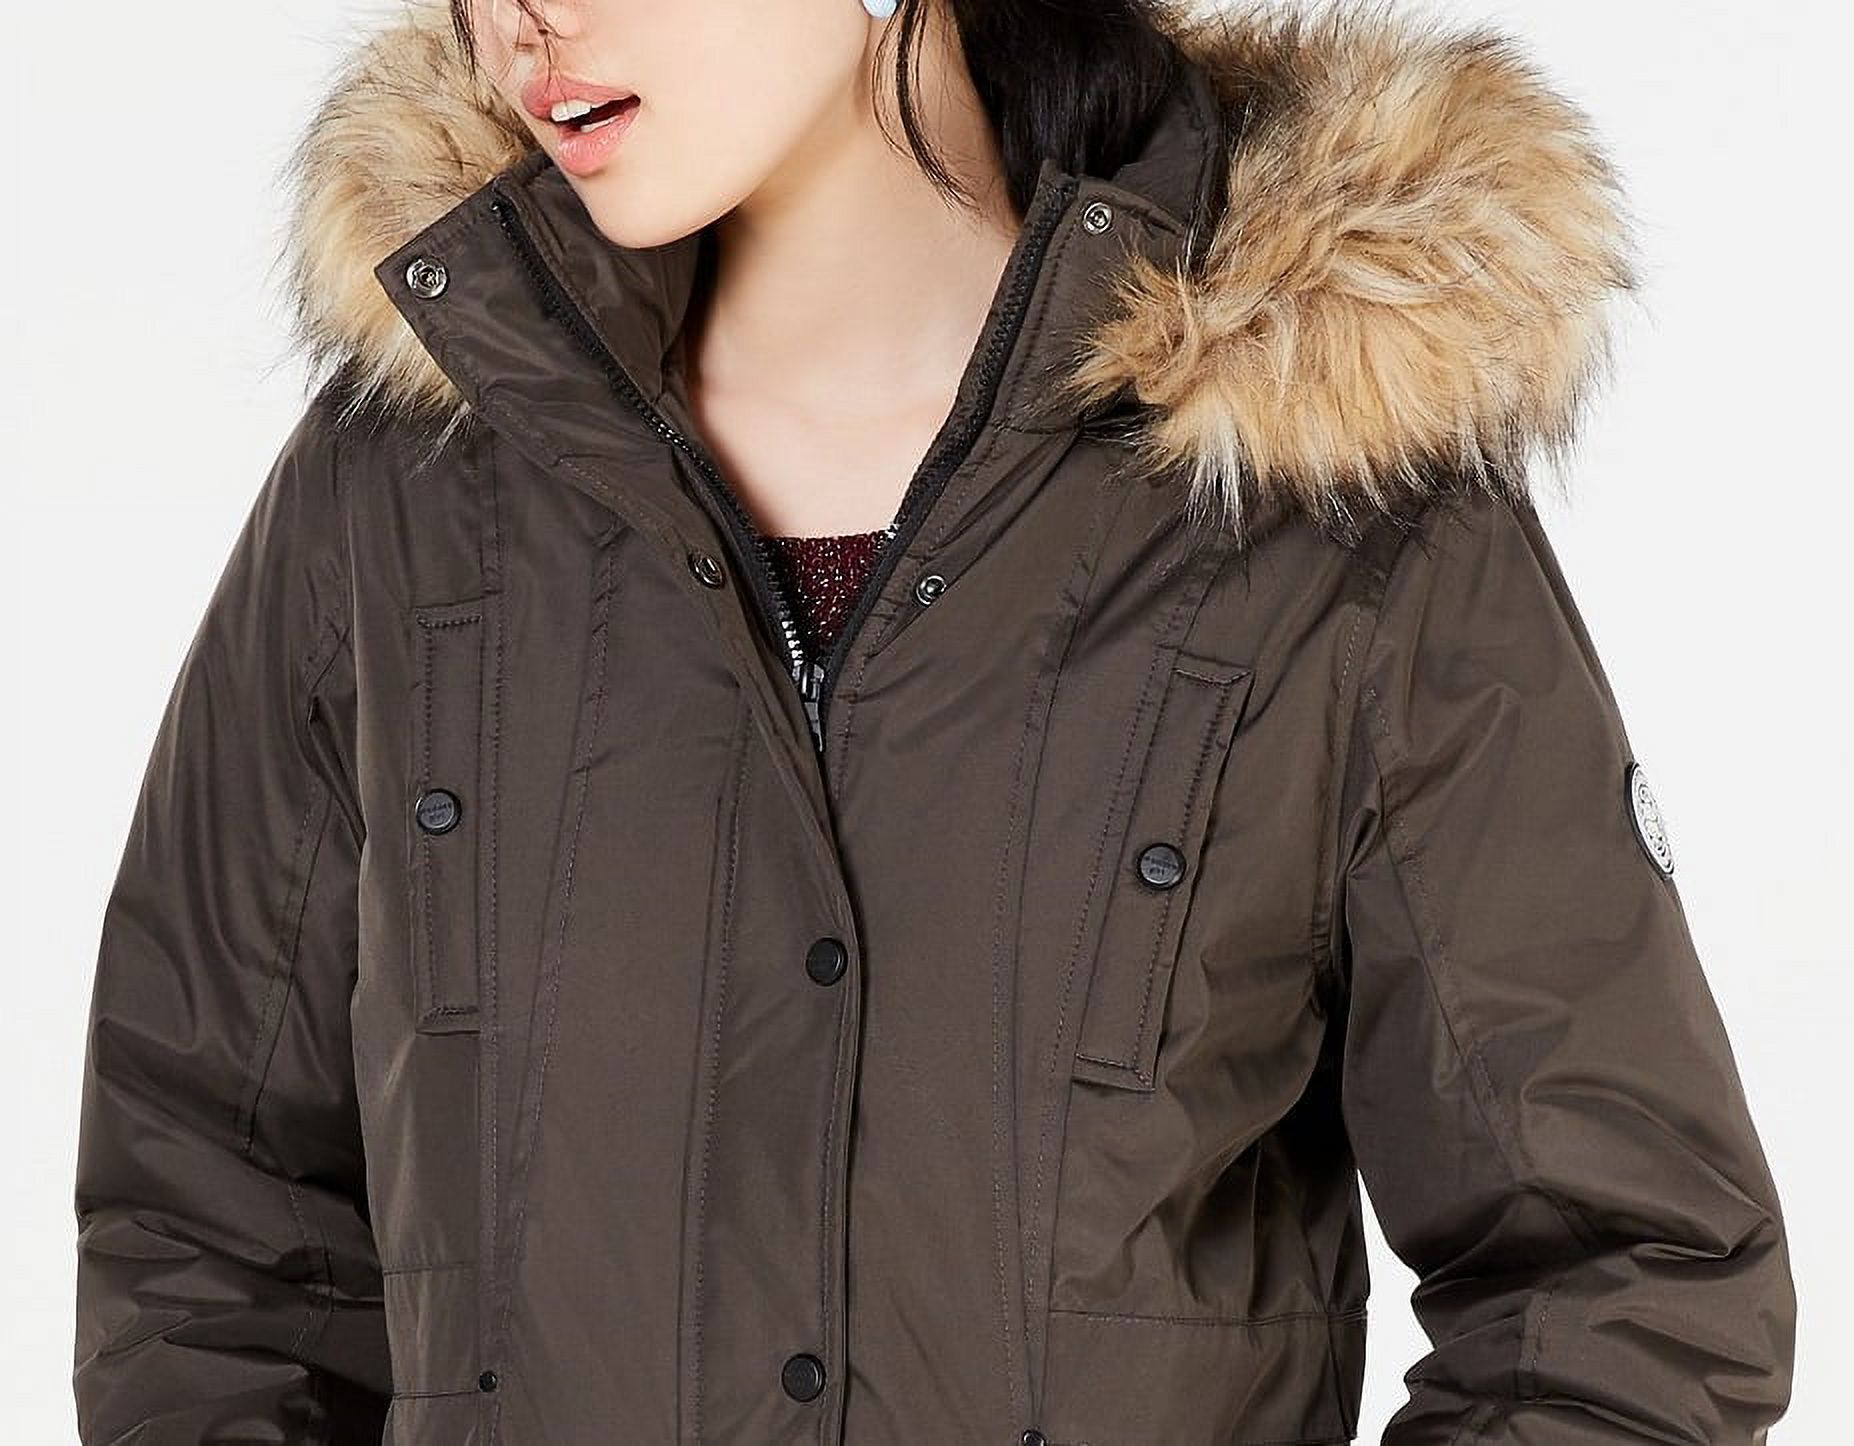 Madden Girl Juniors Women's Faux Fur Trim Hooded Parka Jacket, Gray XS - NEW - image 2 of 3